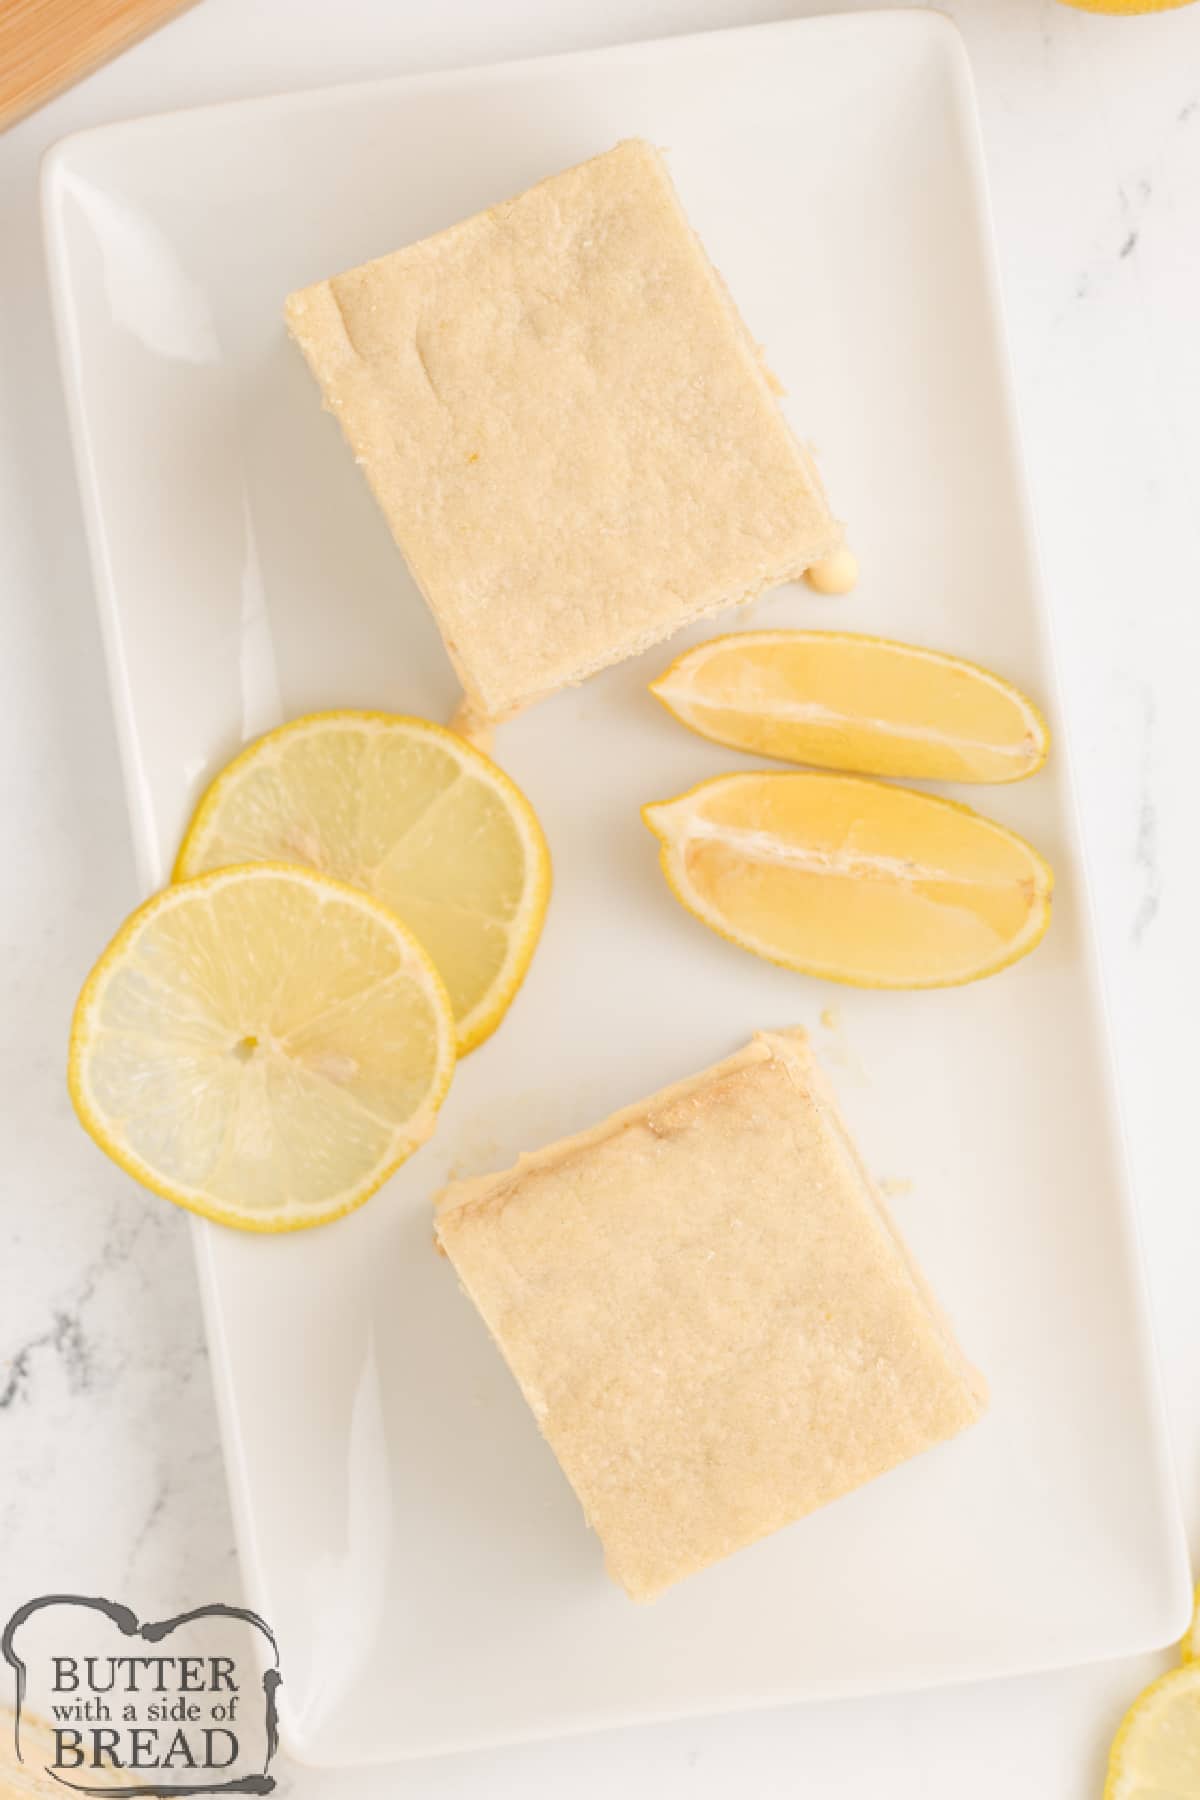 Lemon Ice Cream Bars are made with a delicious lemon ice cream filling sandwiched between two layers of homemade lemon cookie crust. This ice cream sandwich recipe is so simple to make, it makes a perfect summer treat!